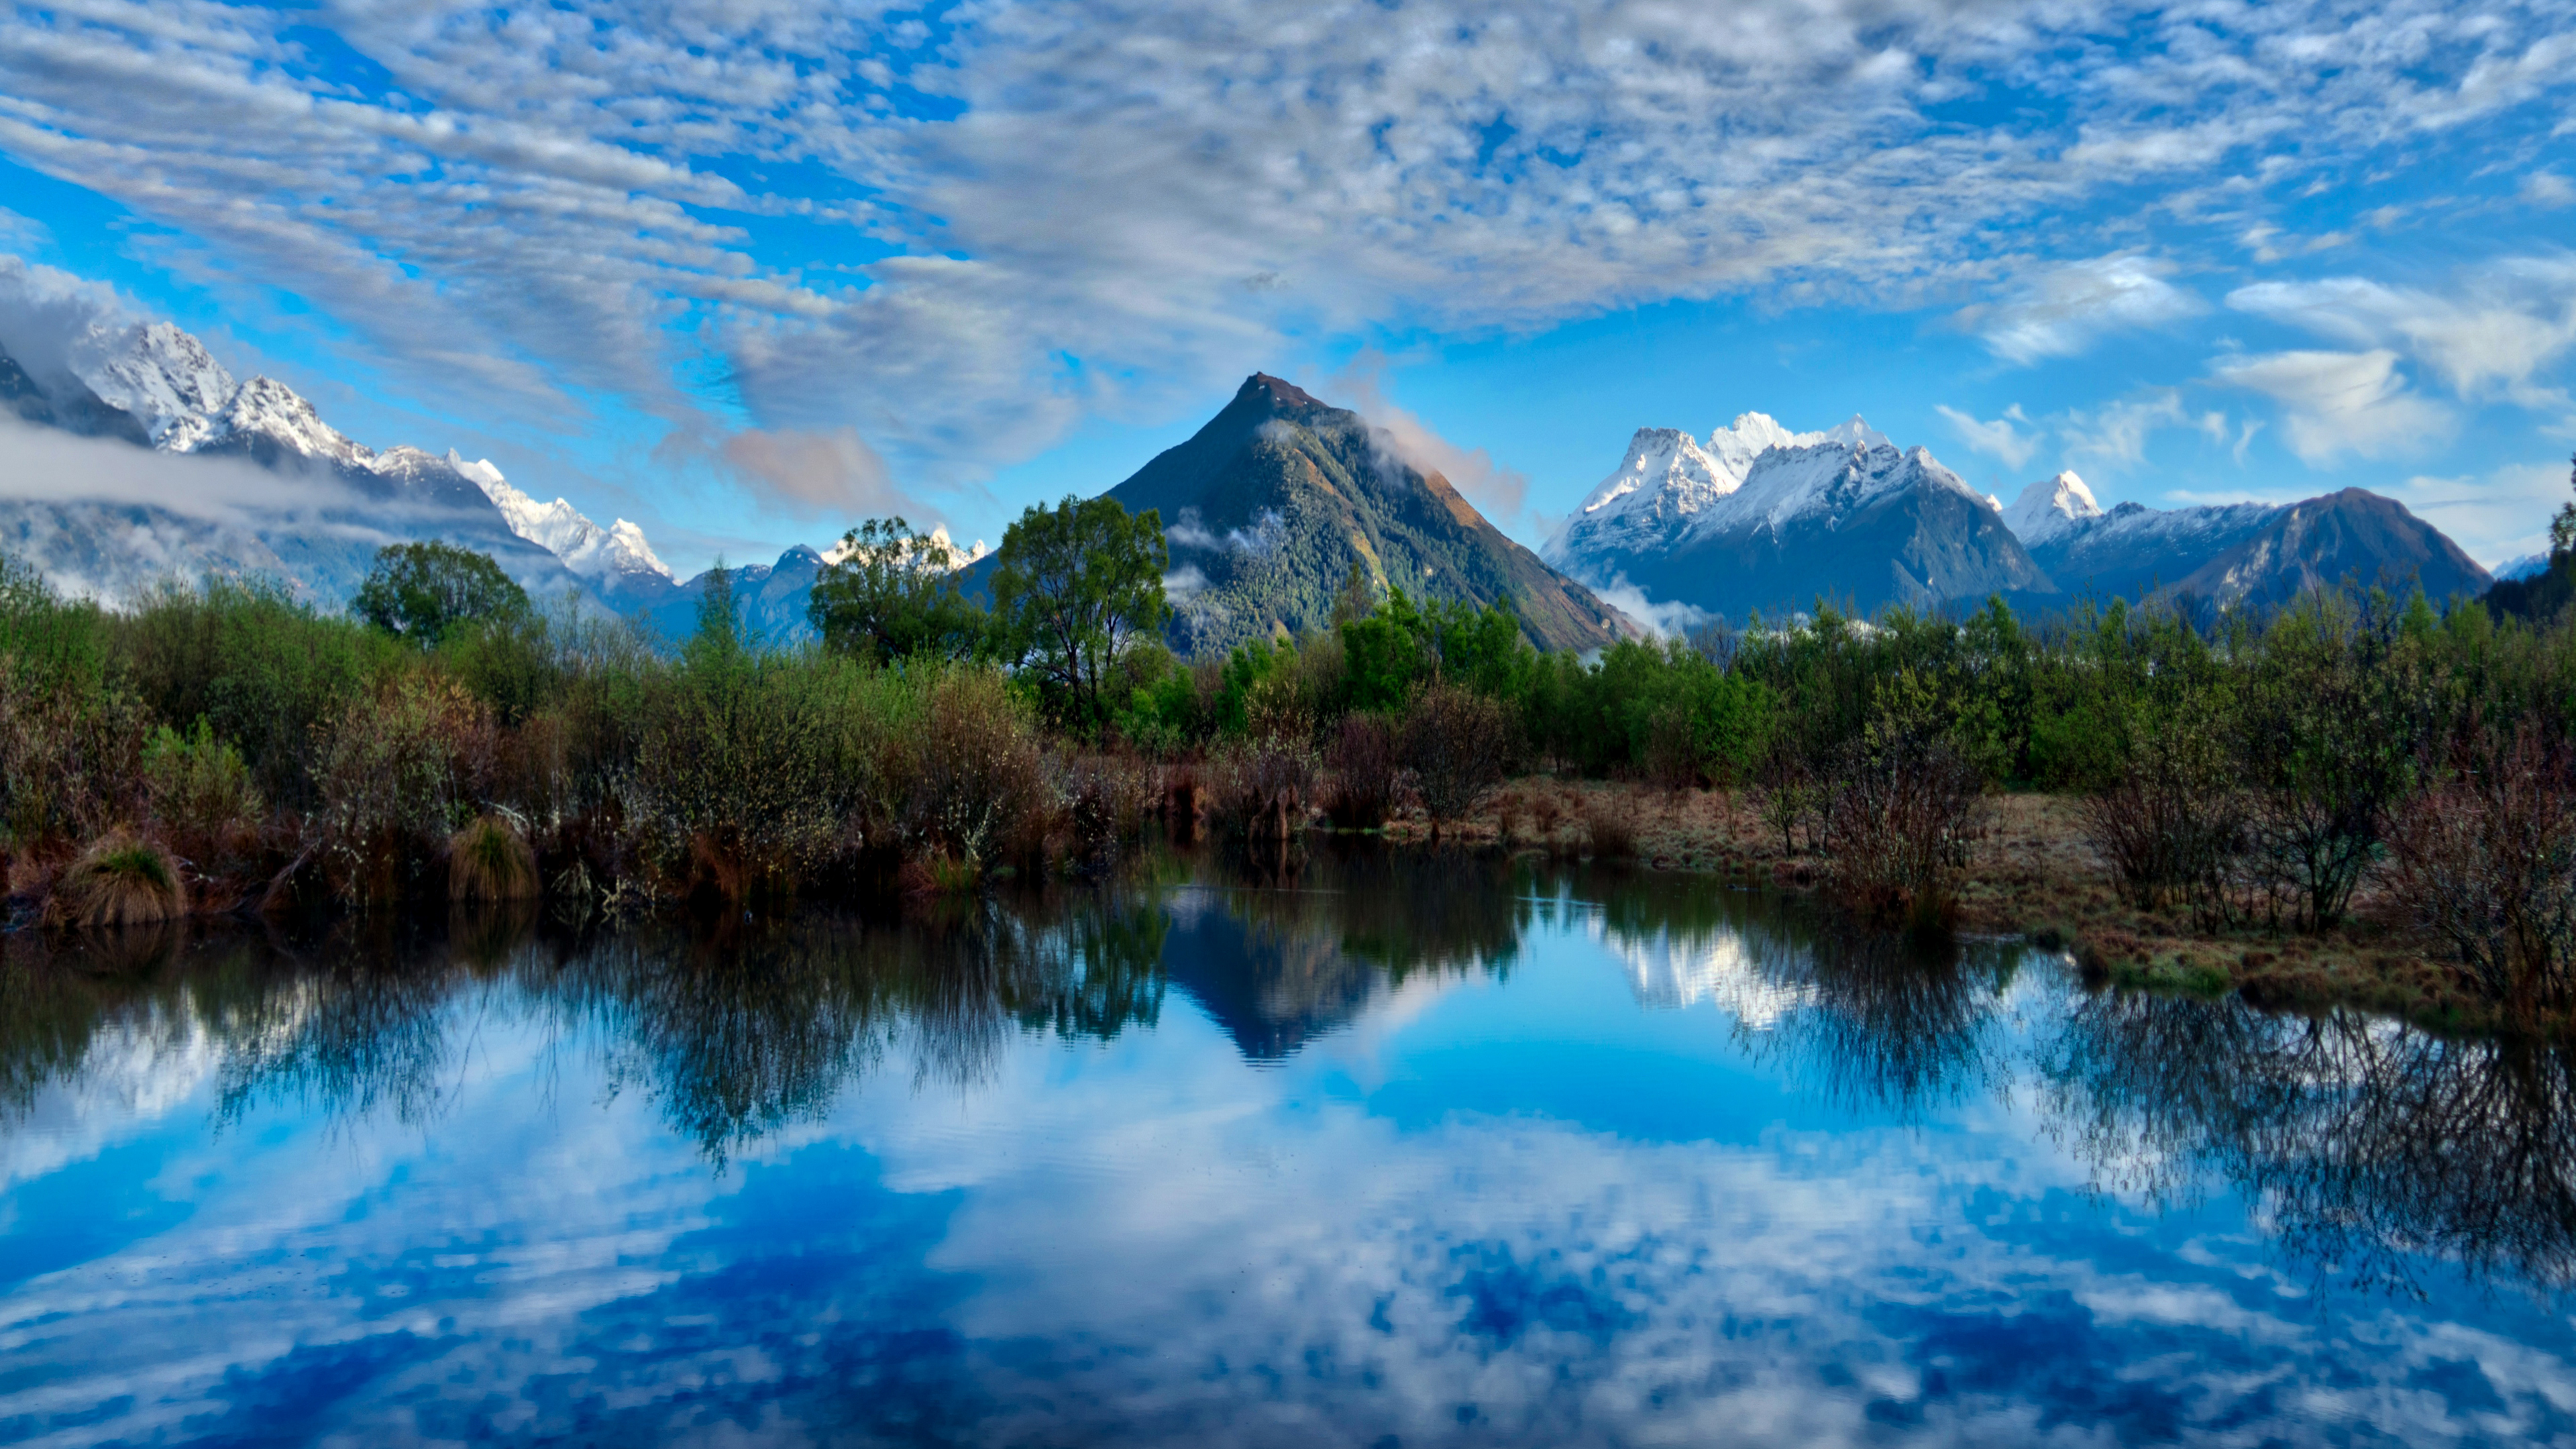 General 3840x2160 Trey Ratcliff photography landscape New Zealand mountains water lake trees mountain chain snow sky clouds reflection nature 4K